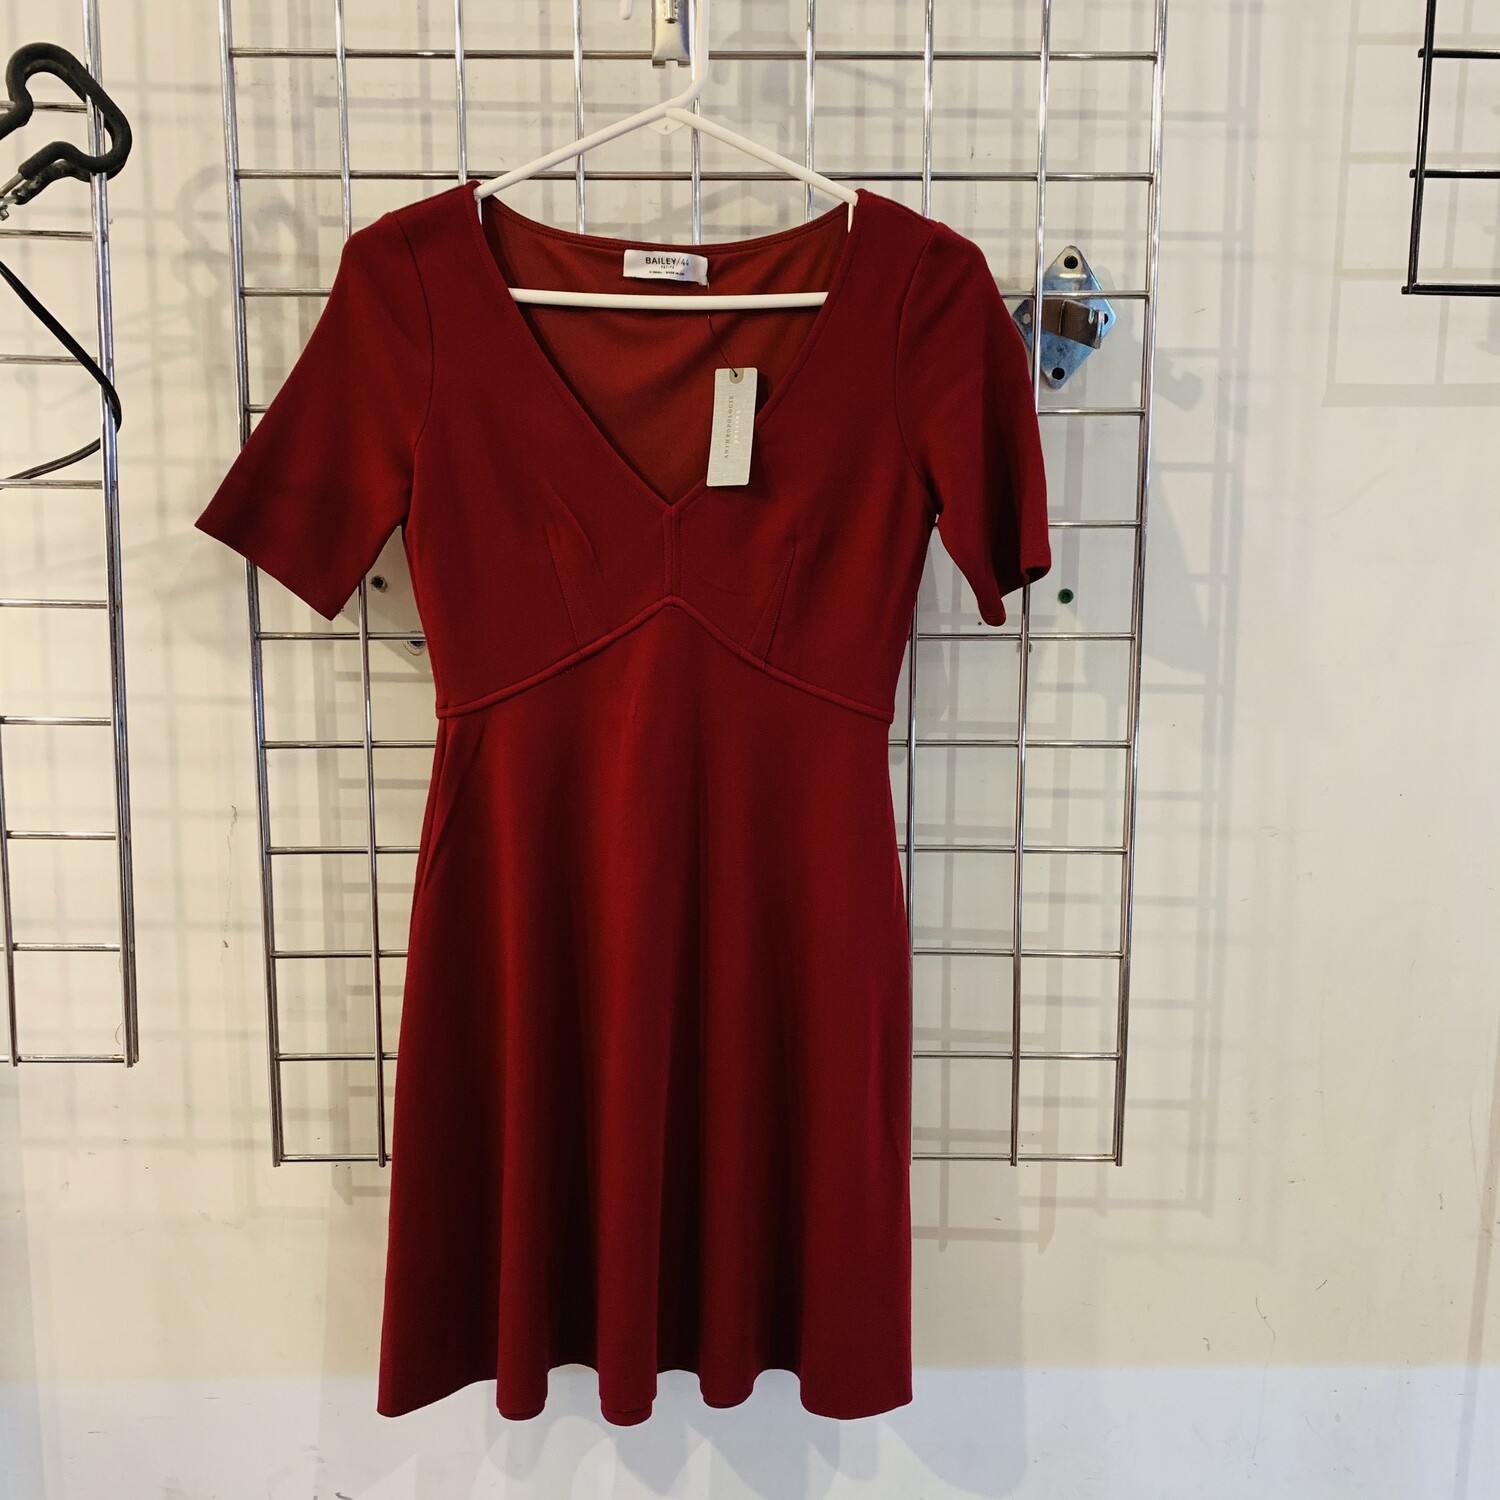 Size XS Anthropologie Bailey/44 Petite SS Dress Red